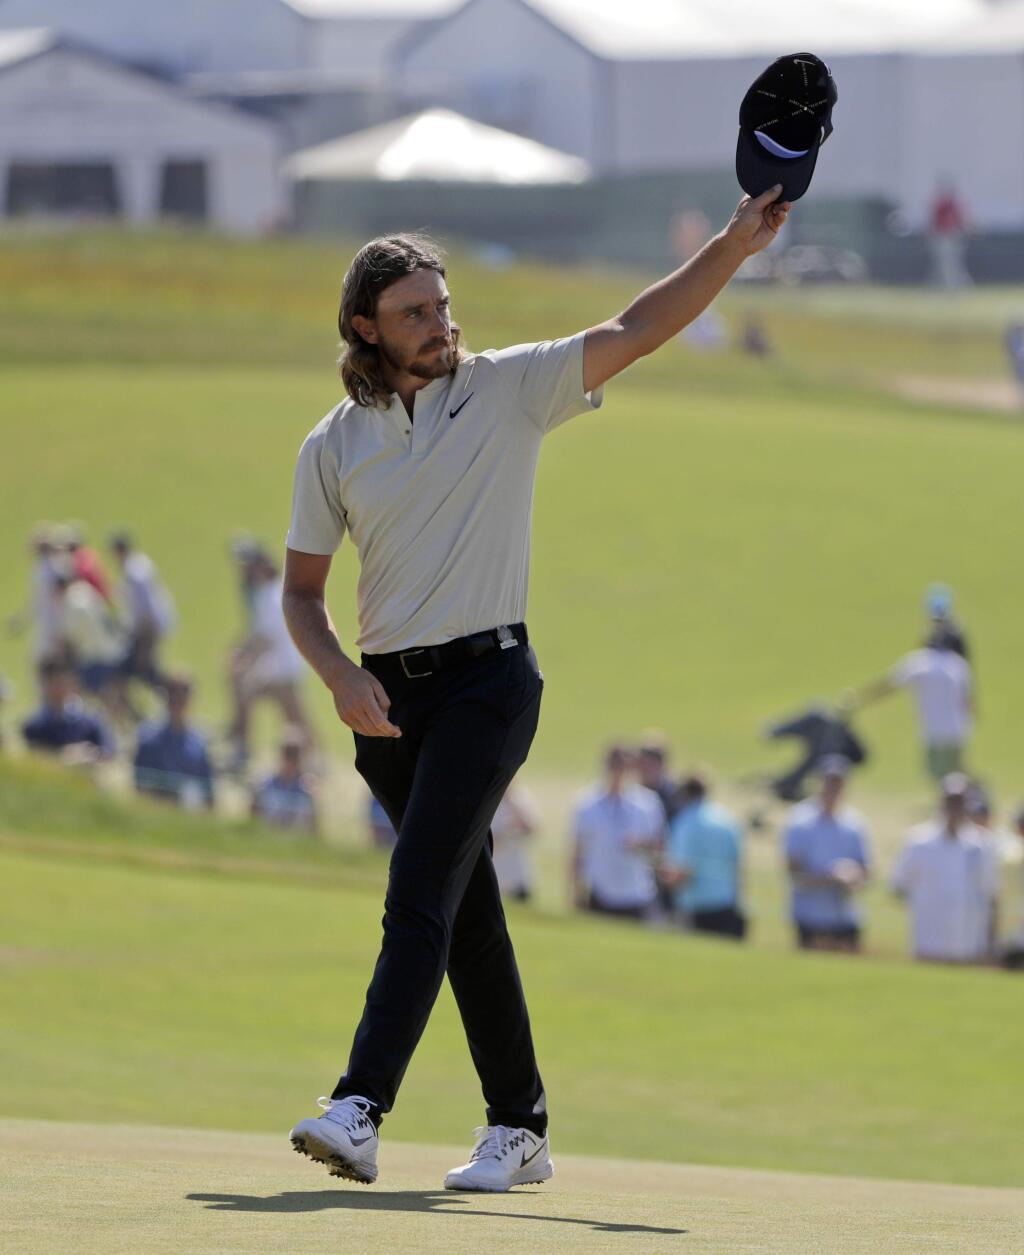 Tommy Fleetwood of England, waves to spectators after finishing the final round of the U.S. Open Golf Championship, Sunday, June 17, 2018, in Southampton, N.Y. (AP Photo/Frank Franklin II)